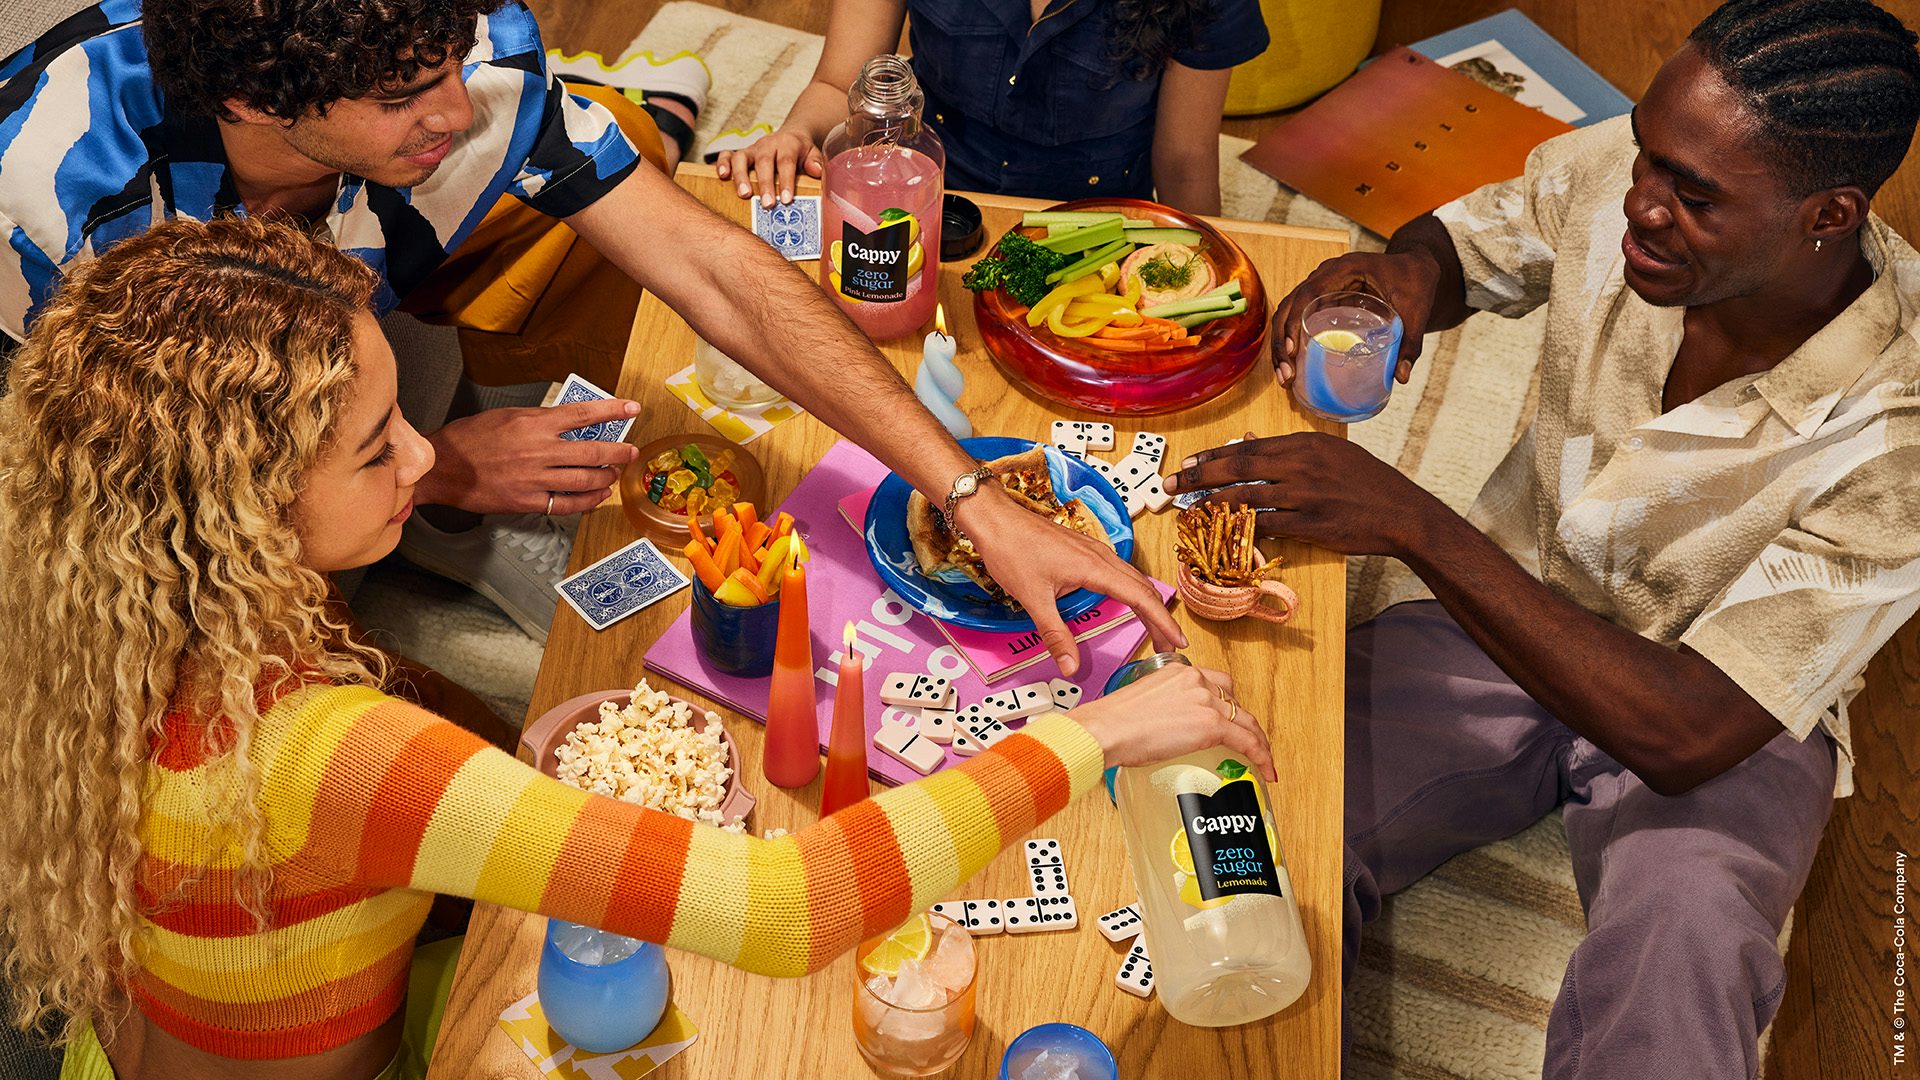 Image shot as part of Minute Maid's new branding showing people sat around a table covered in dominoes, popcorn, and Minute Maid drinks